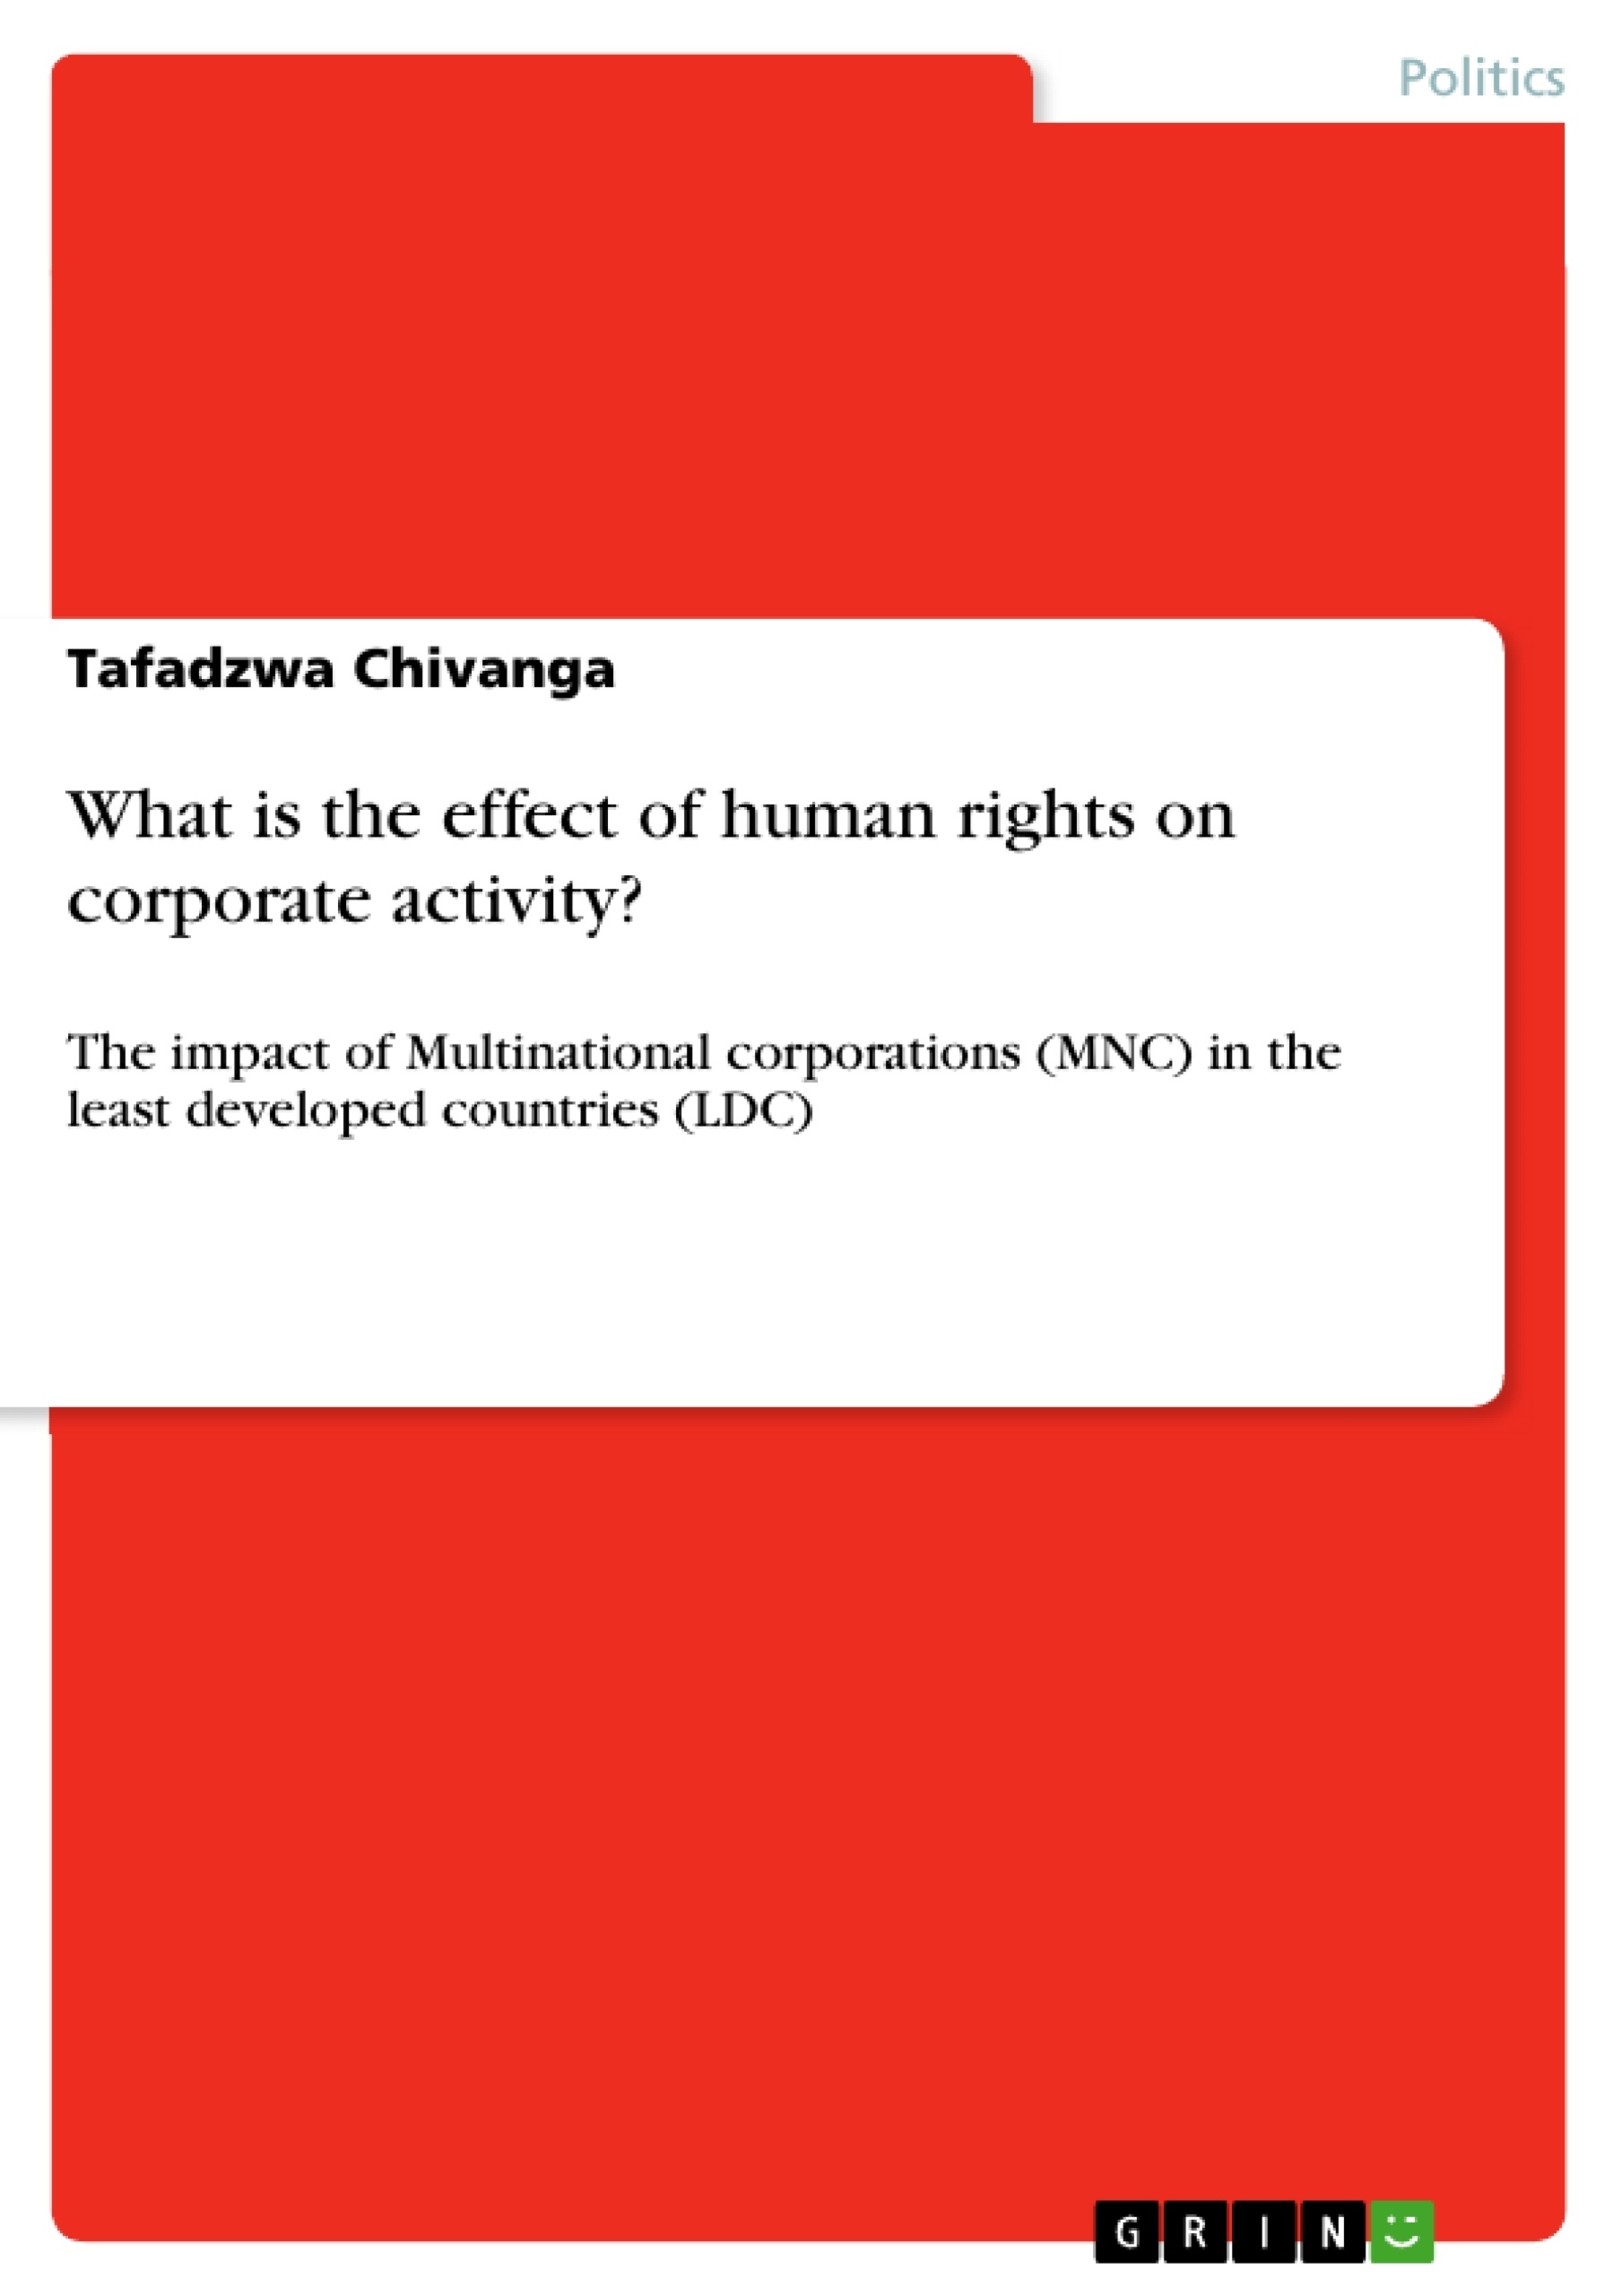 Titre: What is the effect of human rights on corporate activity?